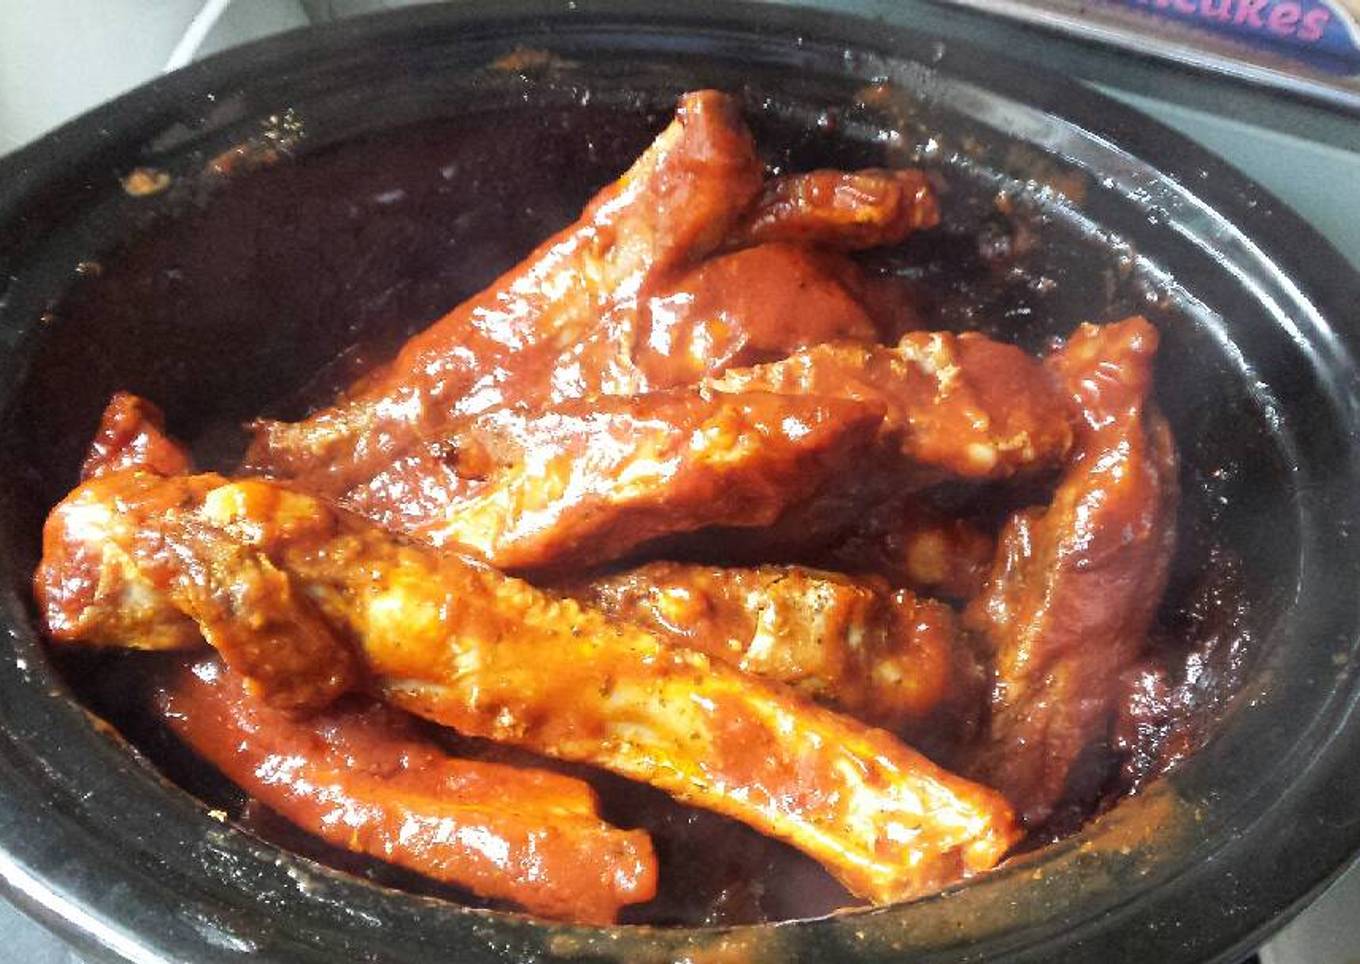 Slow cooked ribs in hunters sauce 